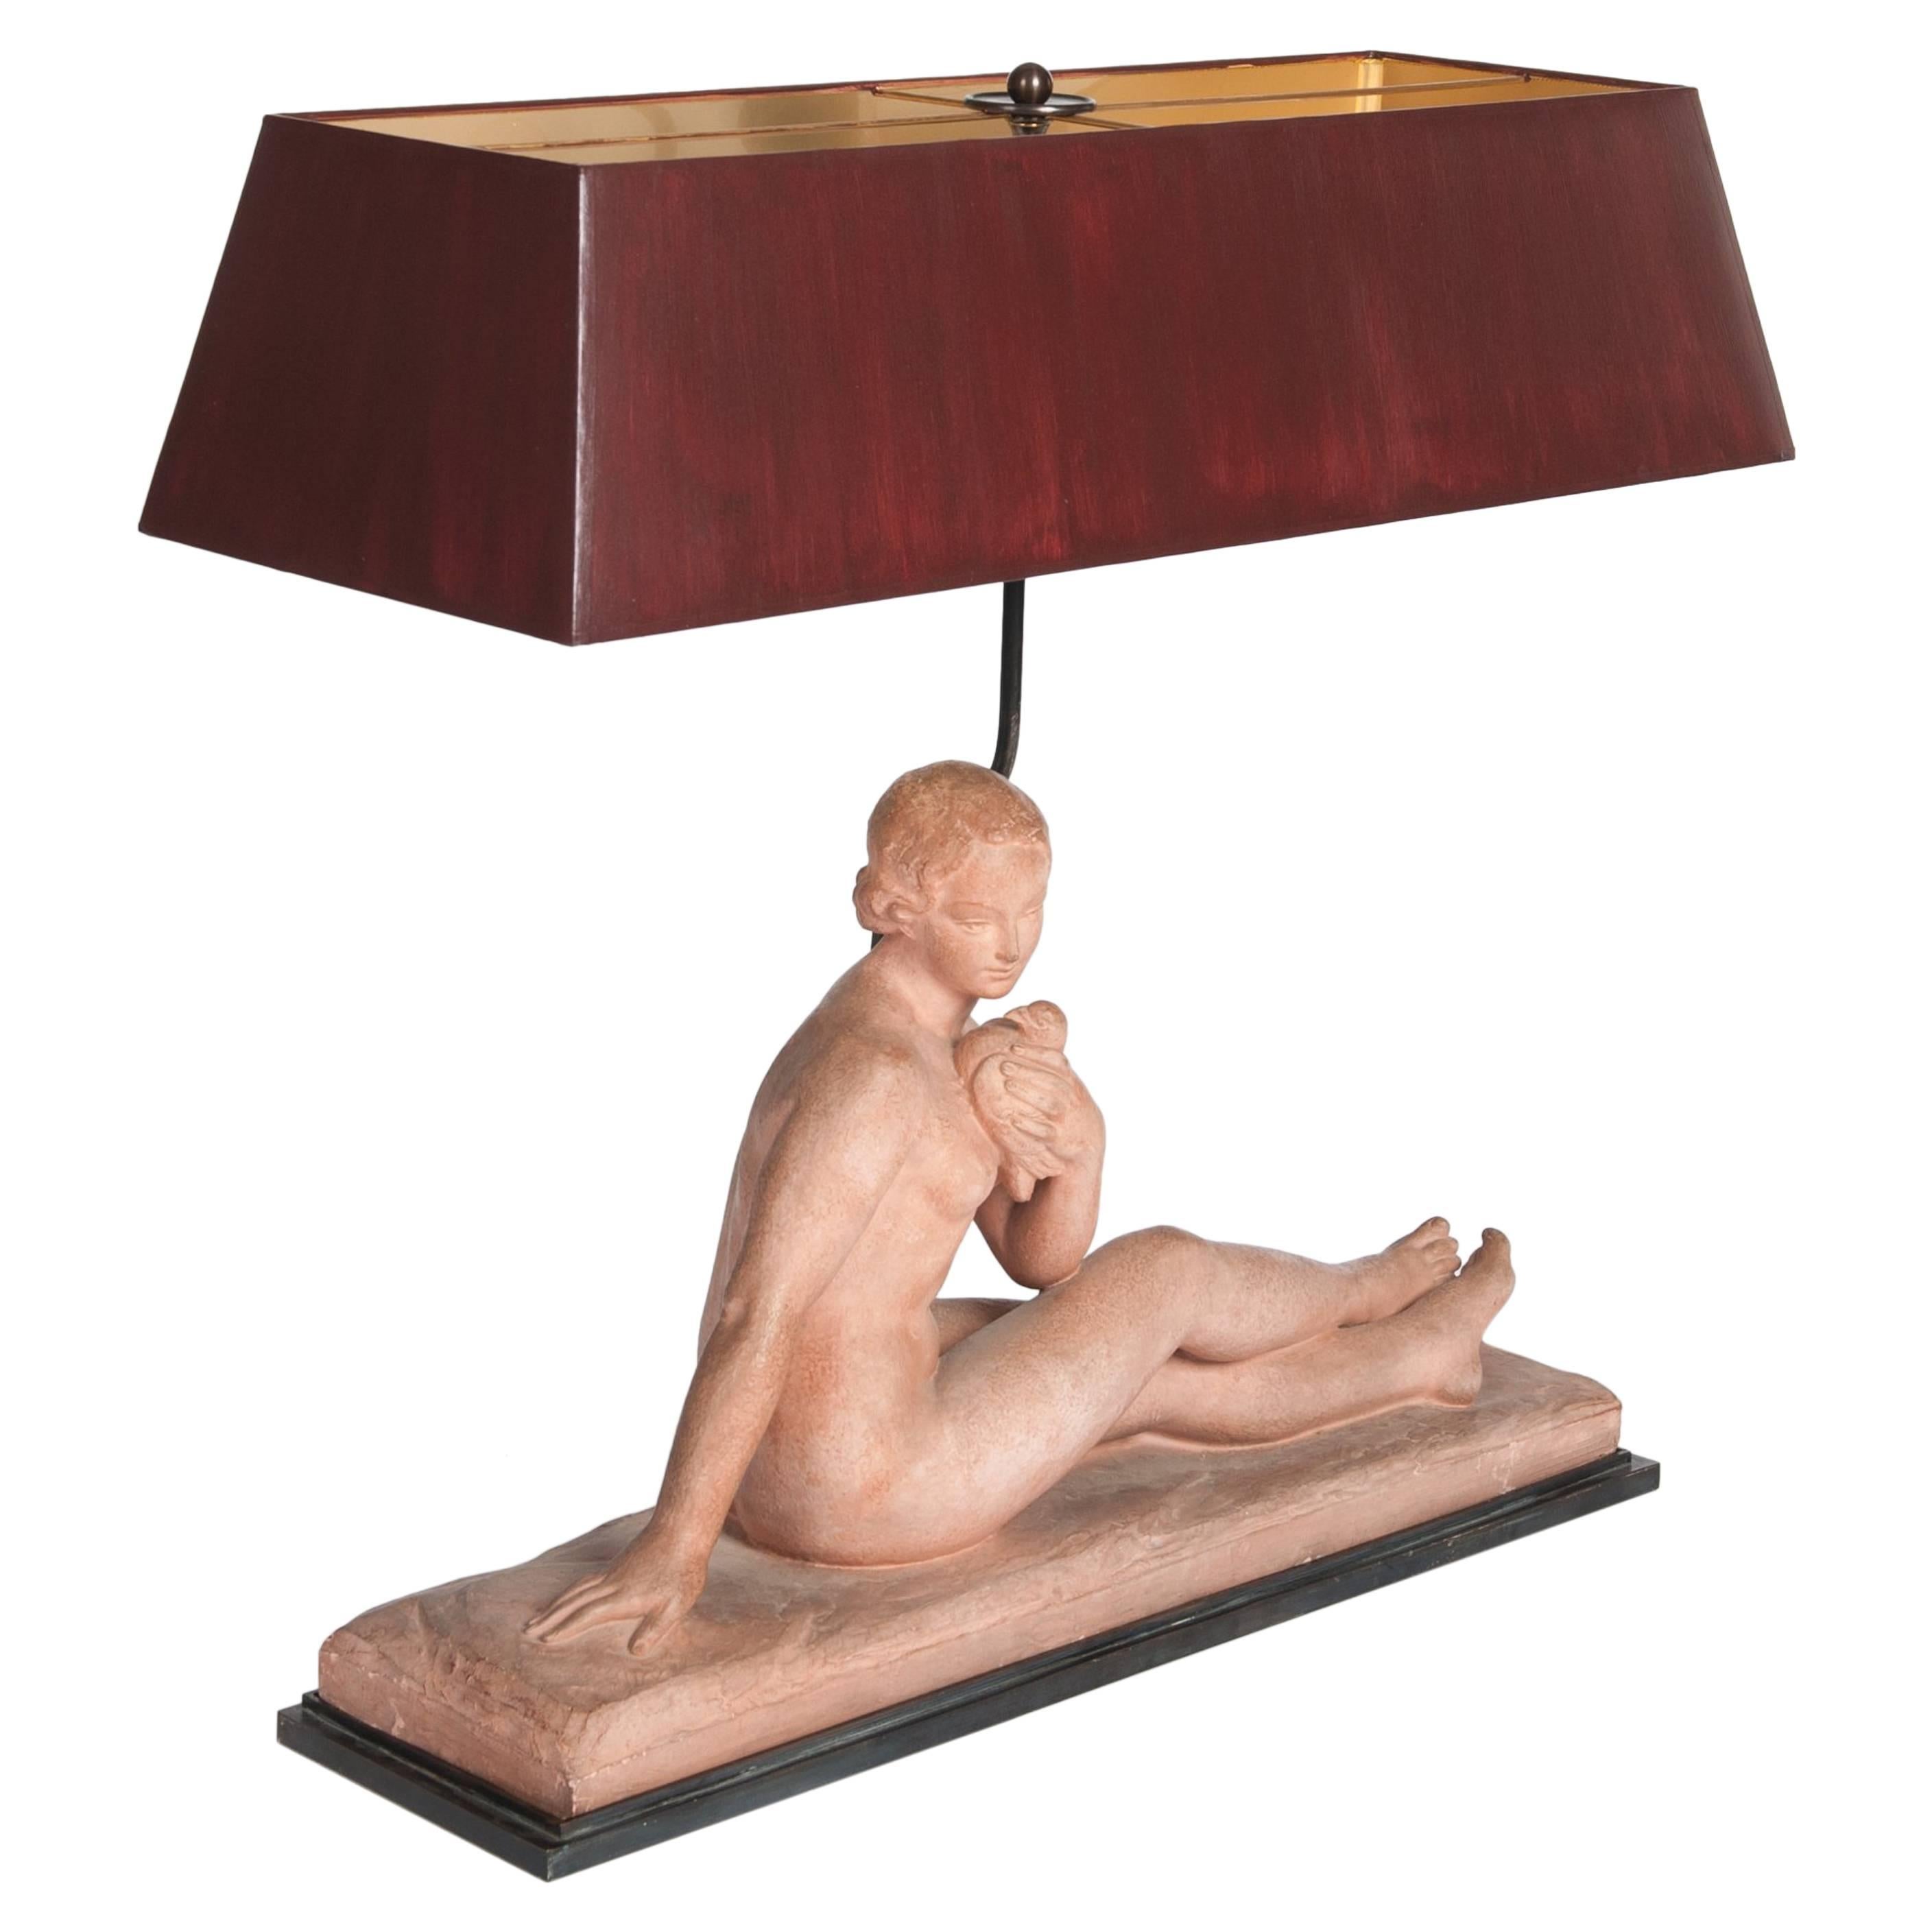 French Art Nouveau Figural Table Lamp in Terracotta, Signed with Red Shade